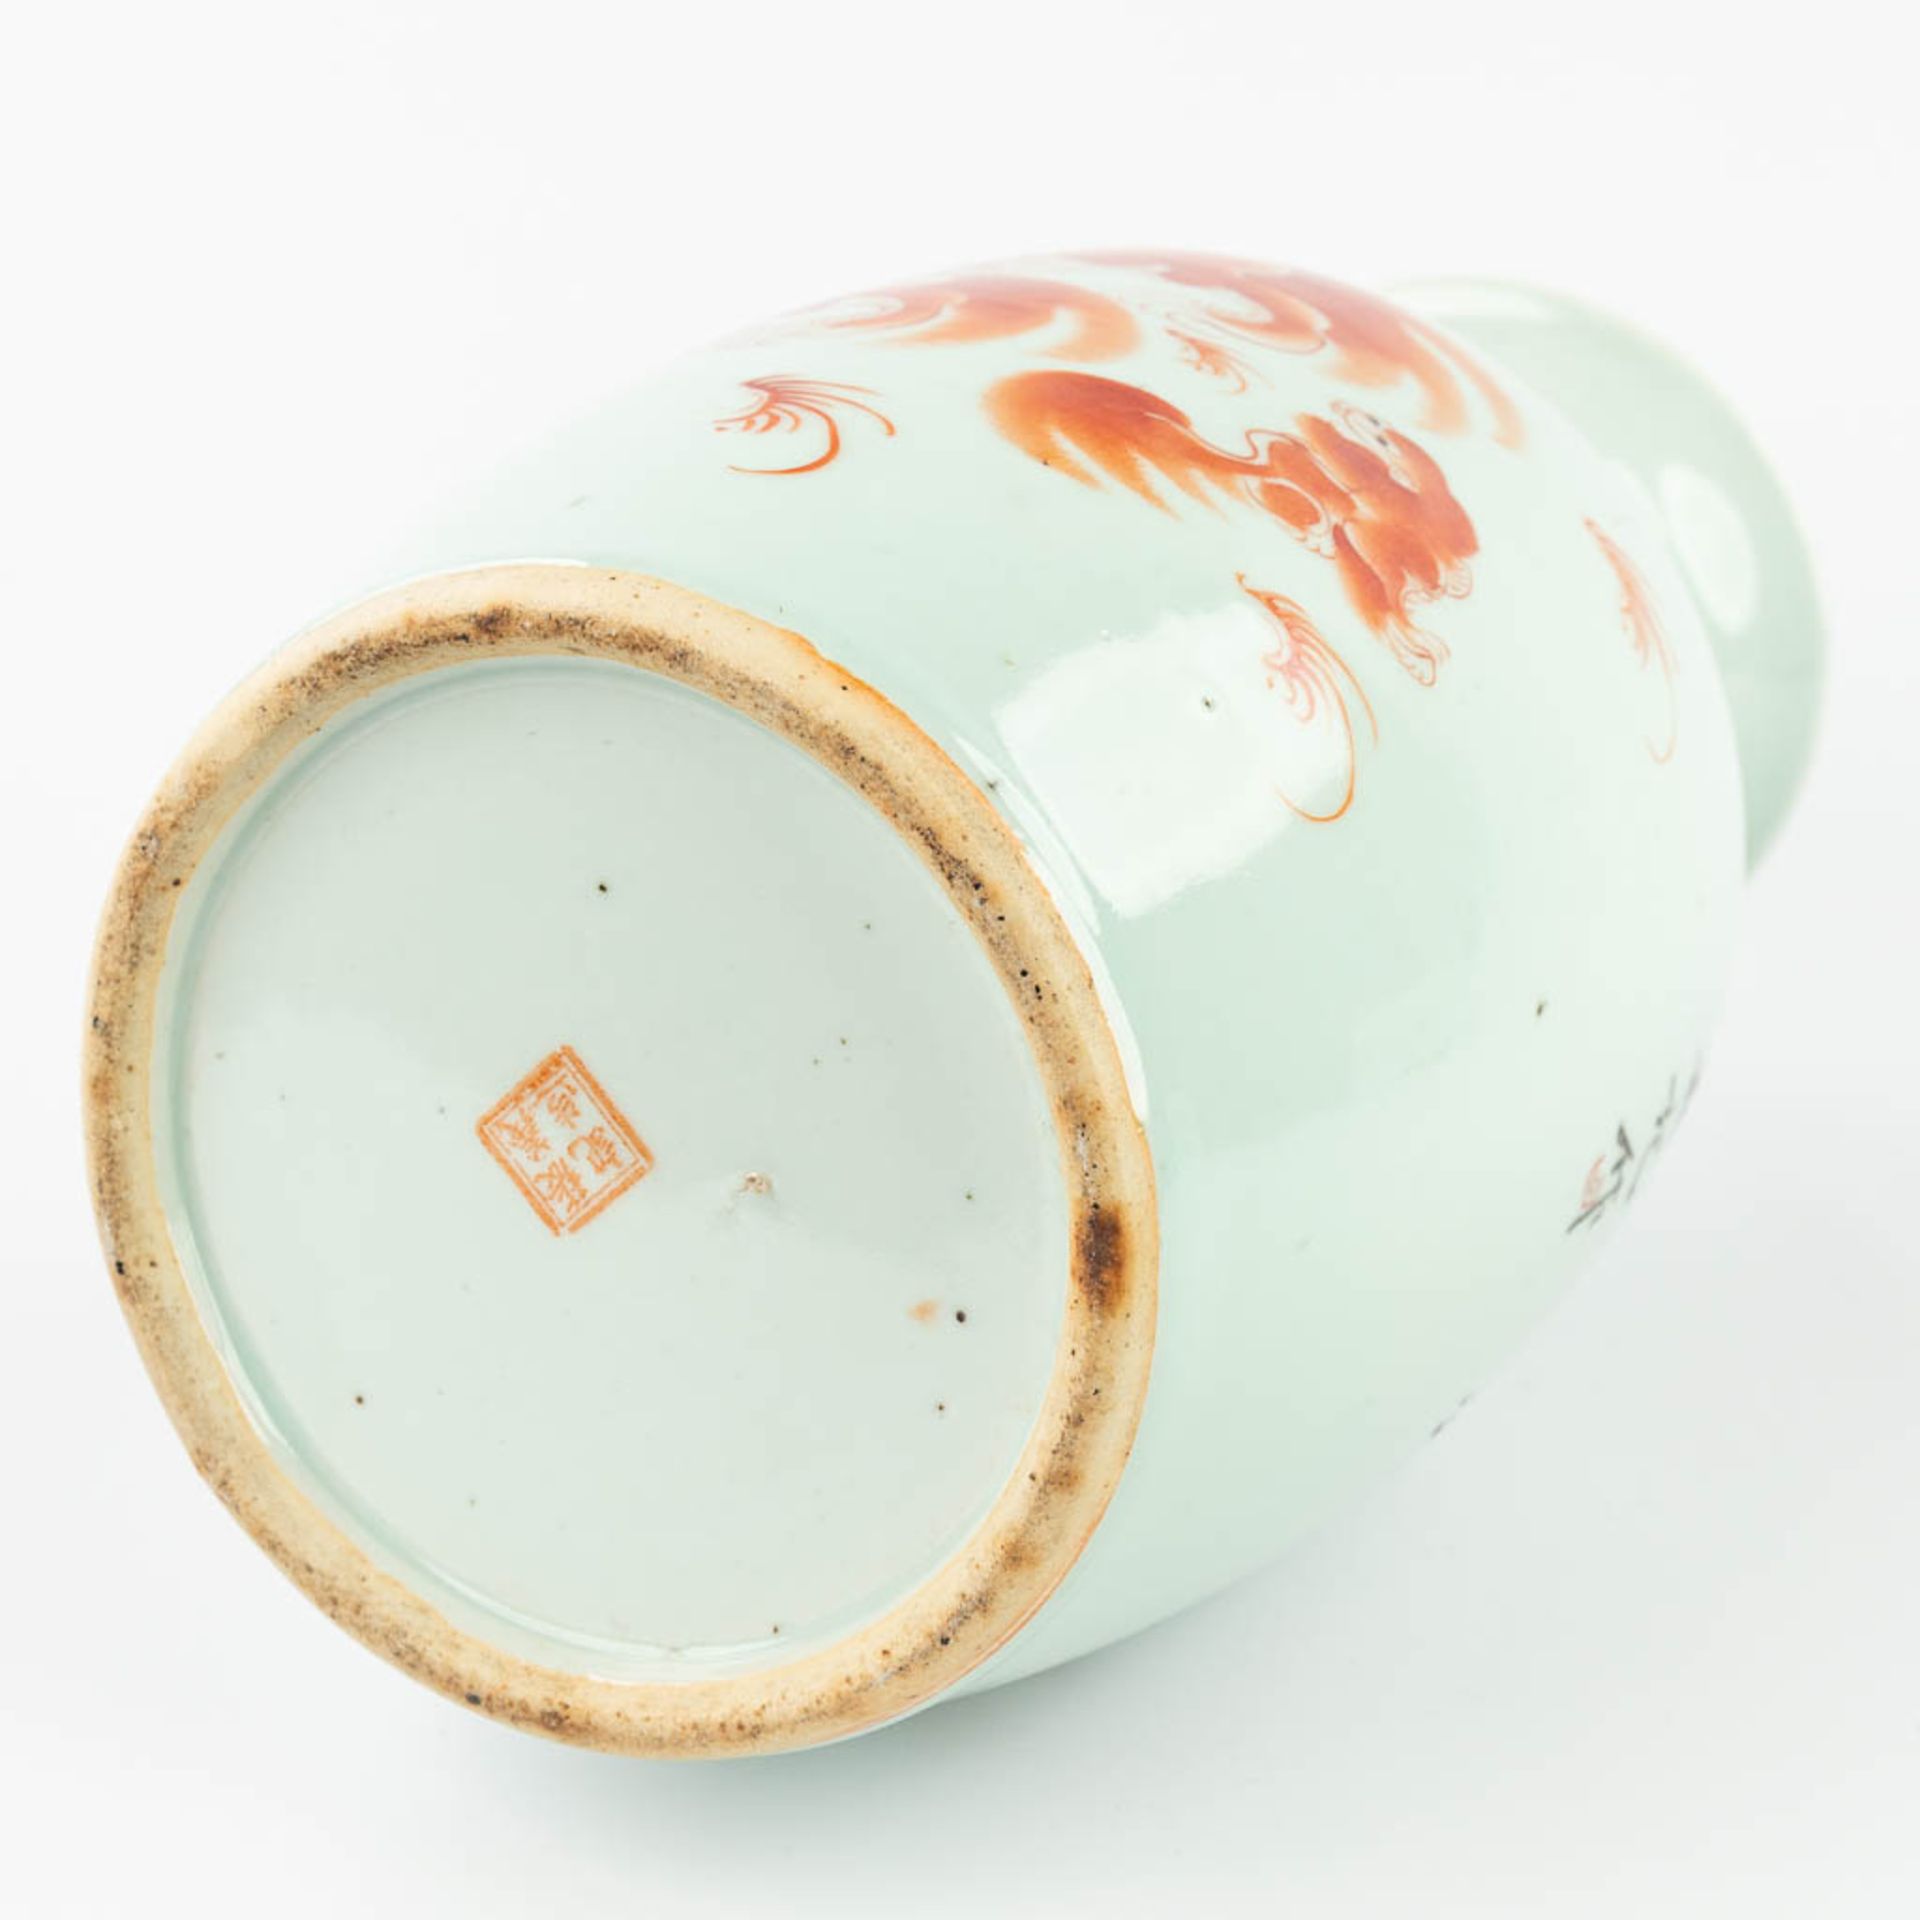 A Chinese vase made of porcelain and decorated with a red foo dog. (44,5 x 21 cm) - Image 9 of 16